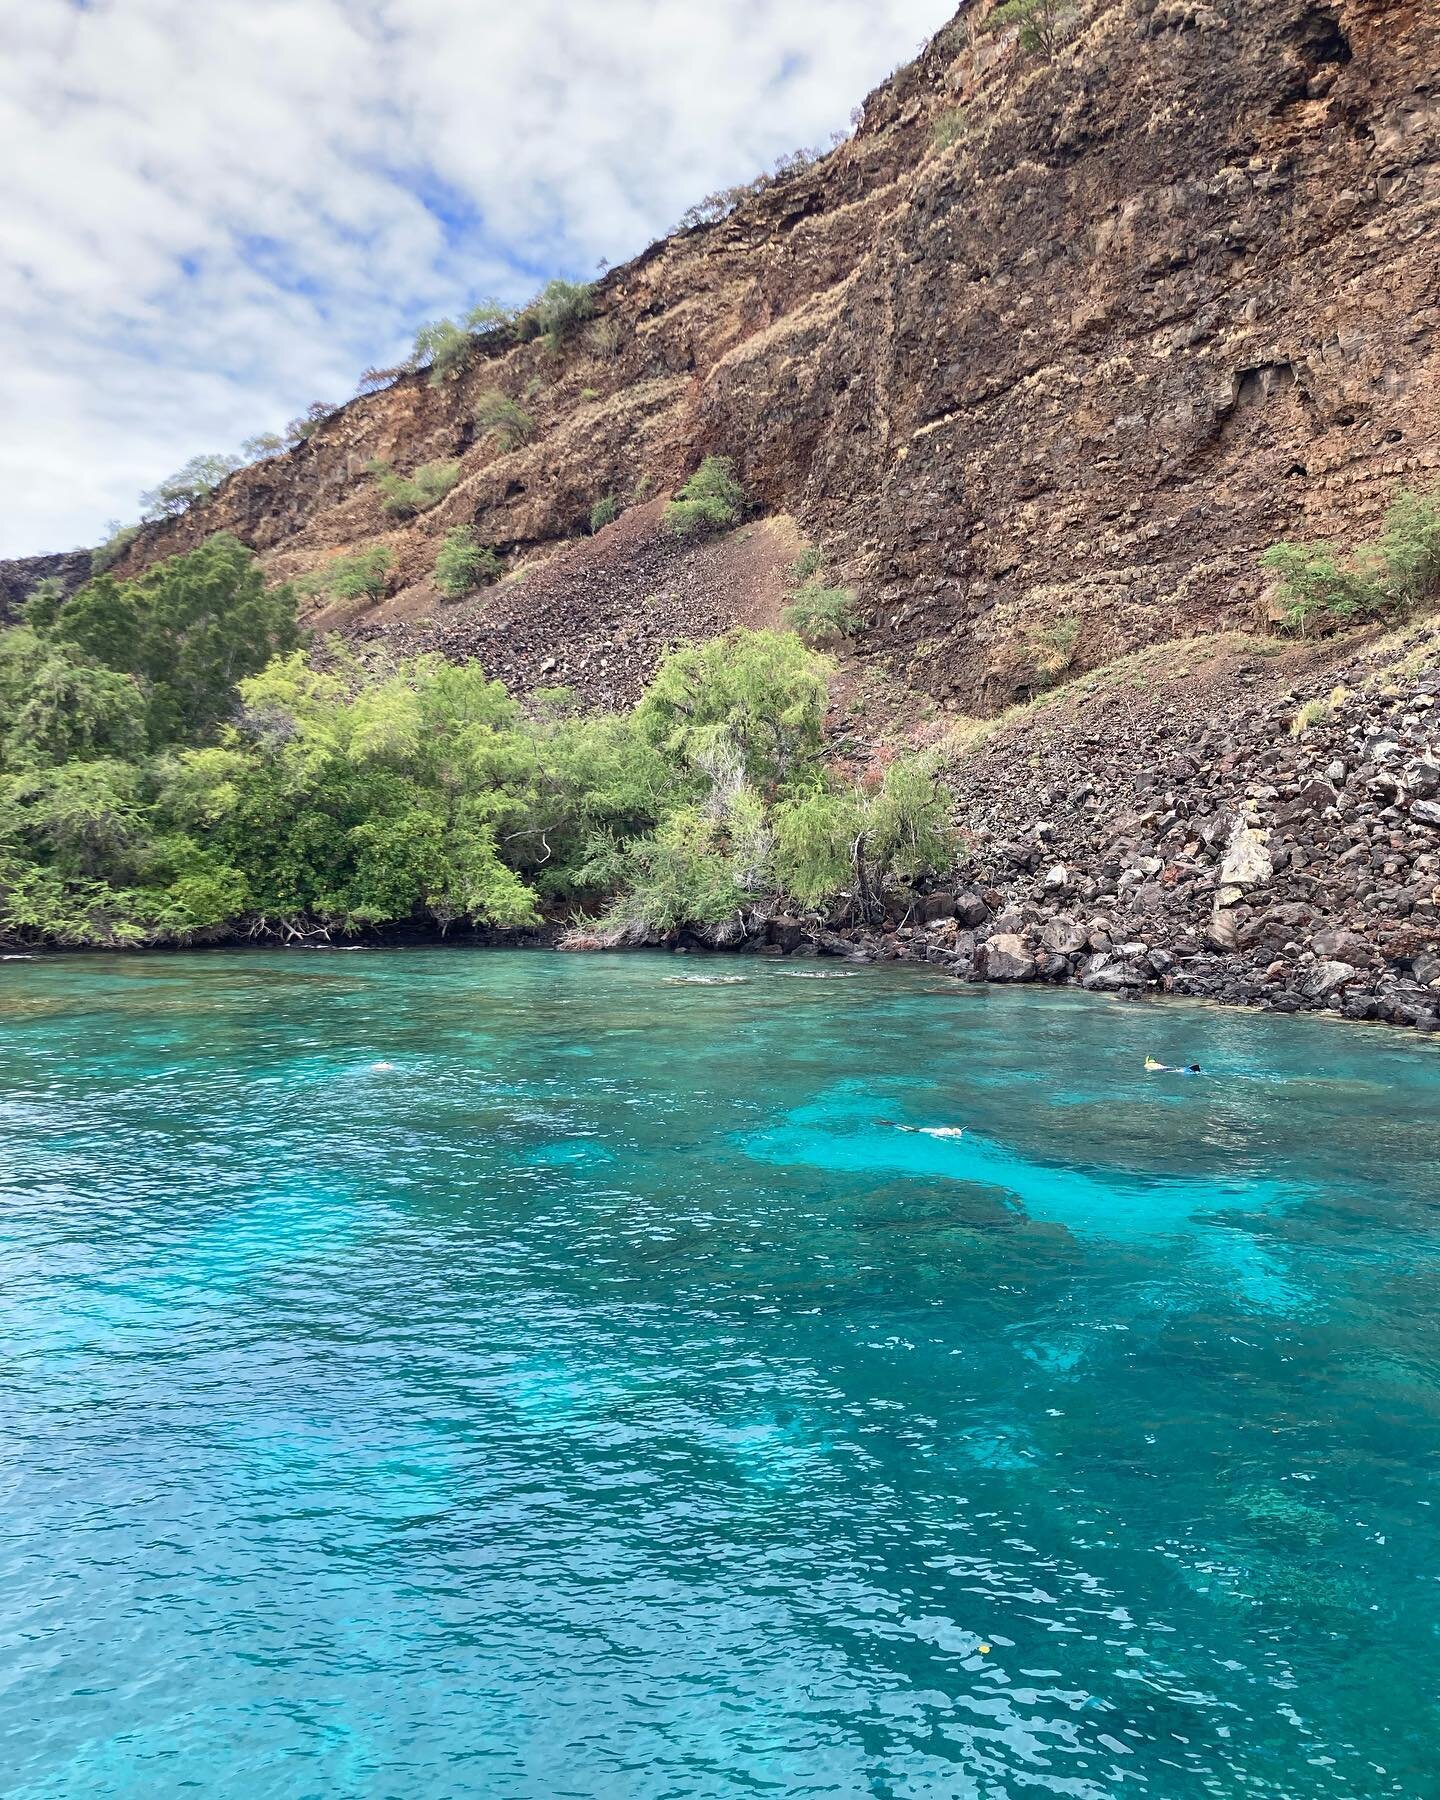 Big Island adventures, part 1: Keawekaheka Point to Waikoloa. Snorkeling near the Captain Cook memorial, obligatory poke lunch at Umeke&rsquo;s Fish Market &amp; Bar, gorgeous sunset sailboat ride from Kona to a phenomenal dinner at Ulu Ocean Grill (